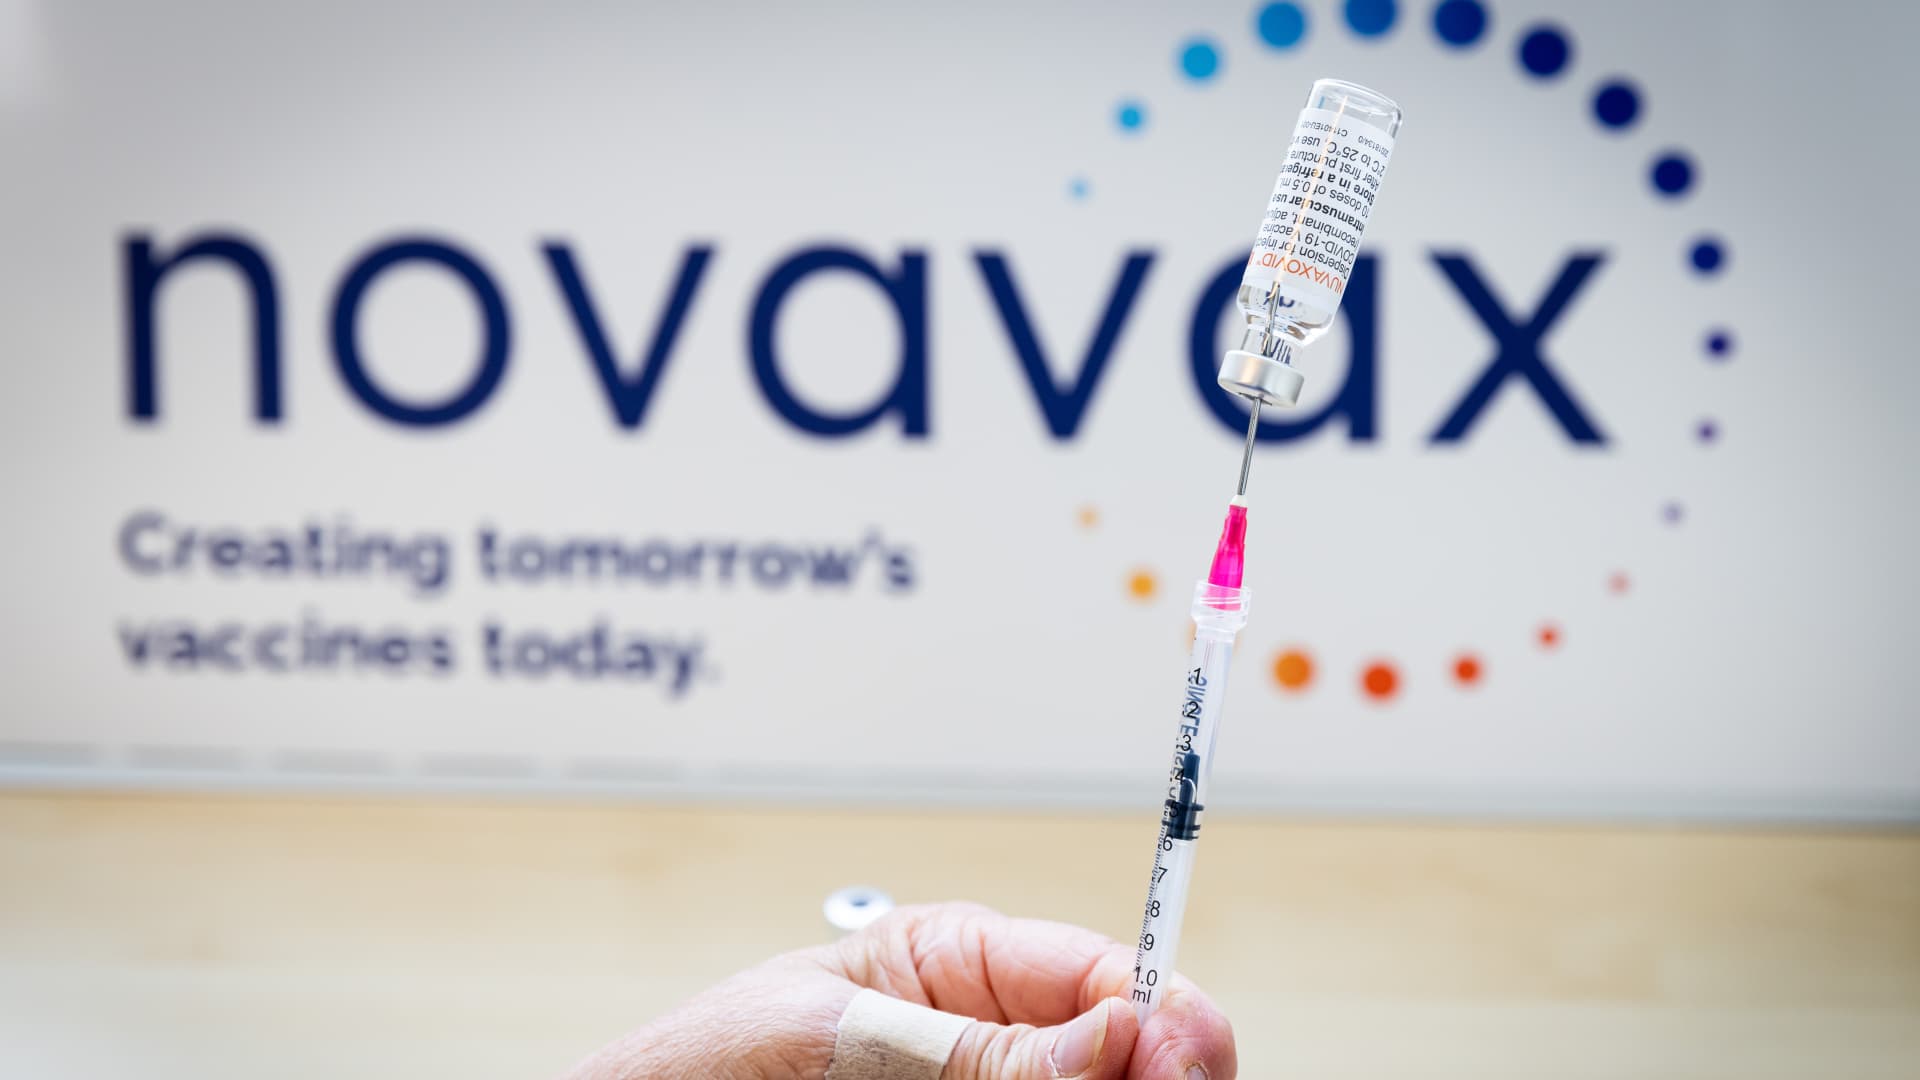 Novavax to settle dispute over canceled Covid vaccine purchase agreement